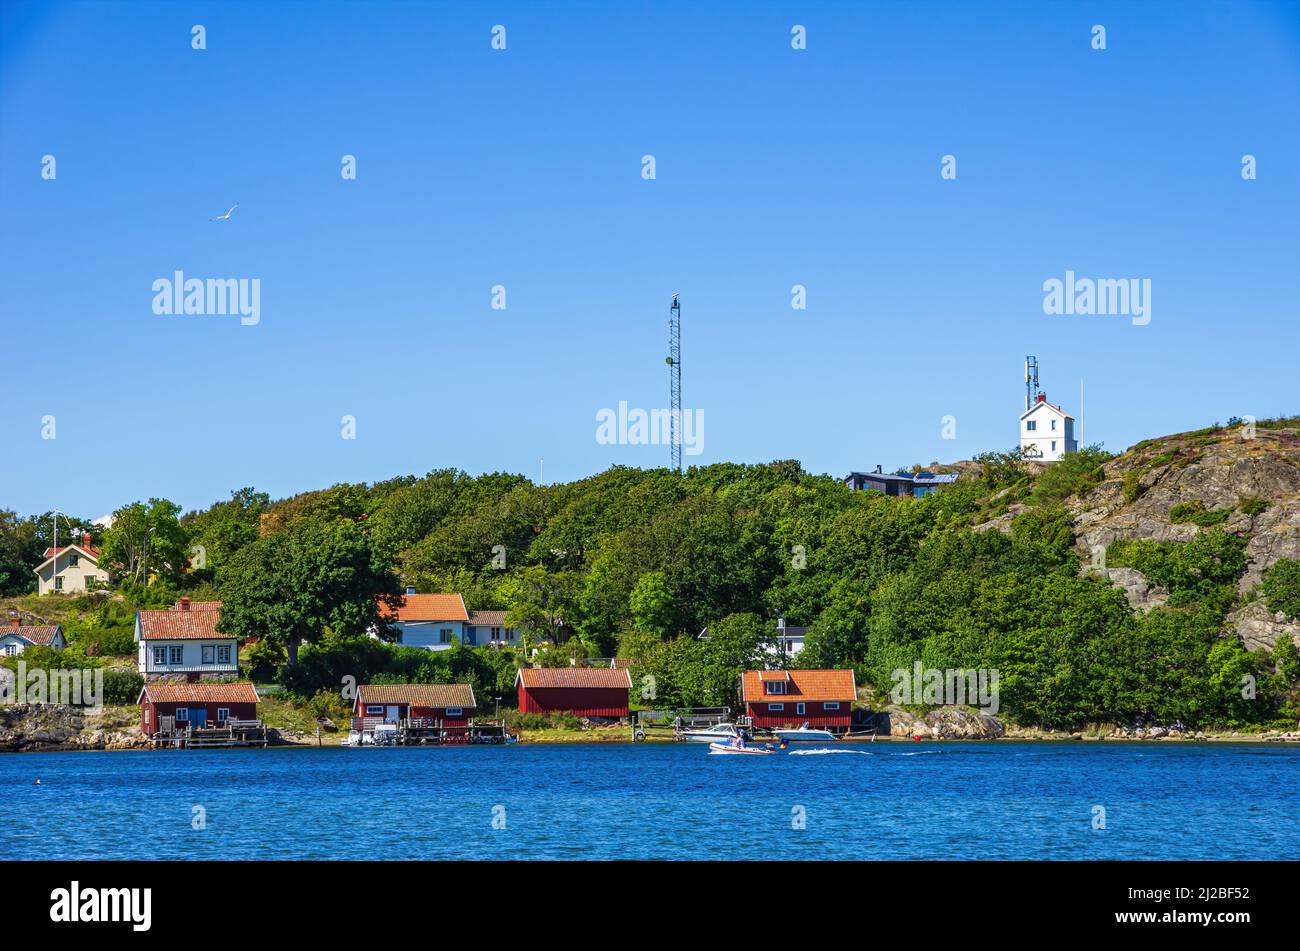 Picturesque coastal landscape with boat sheds and cottages, South coast of North Koster Island, Bohuslän, Västra Götalands län, Sweden. Stock Photo